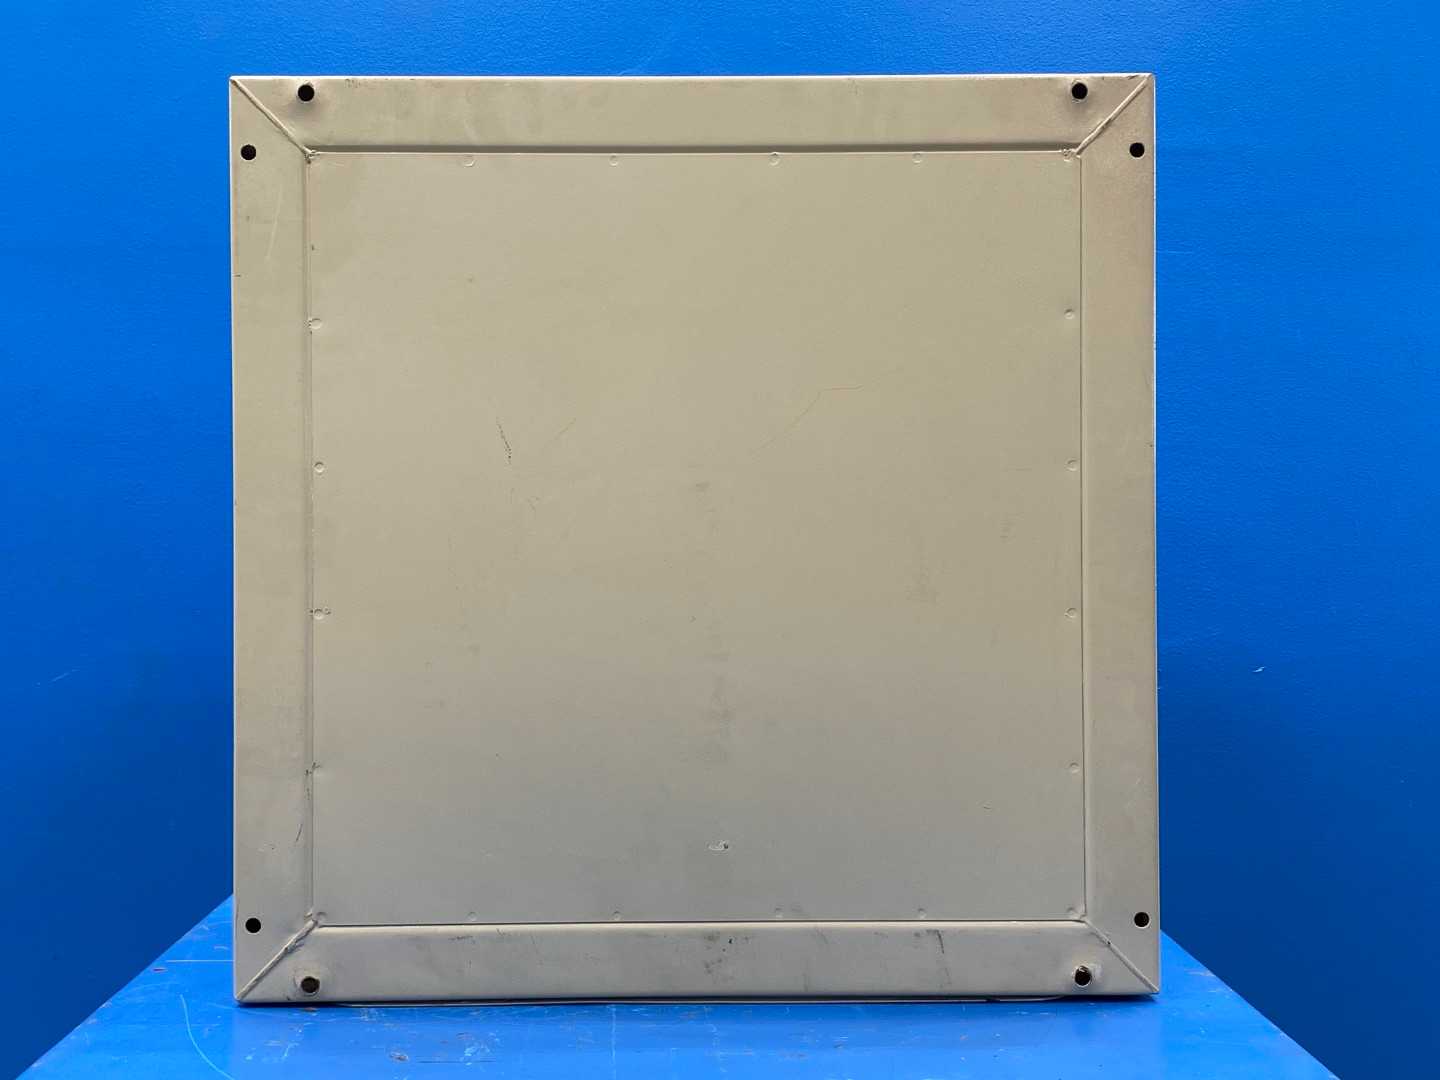 Electrical Enclosure 24"x24"x10" with Emergency Stop